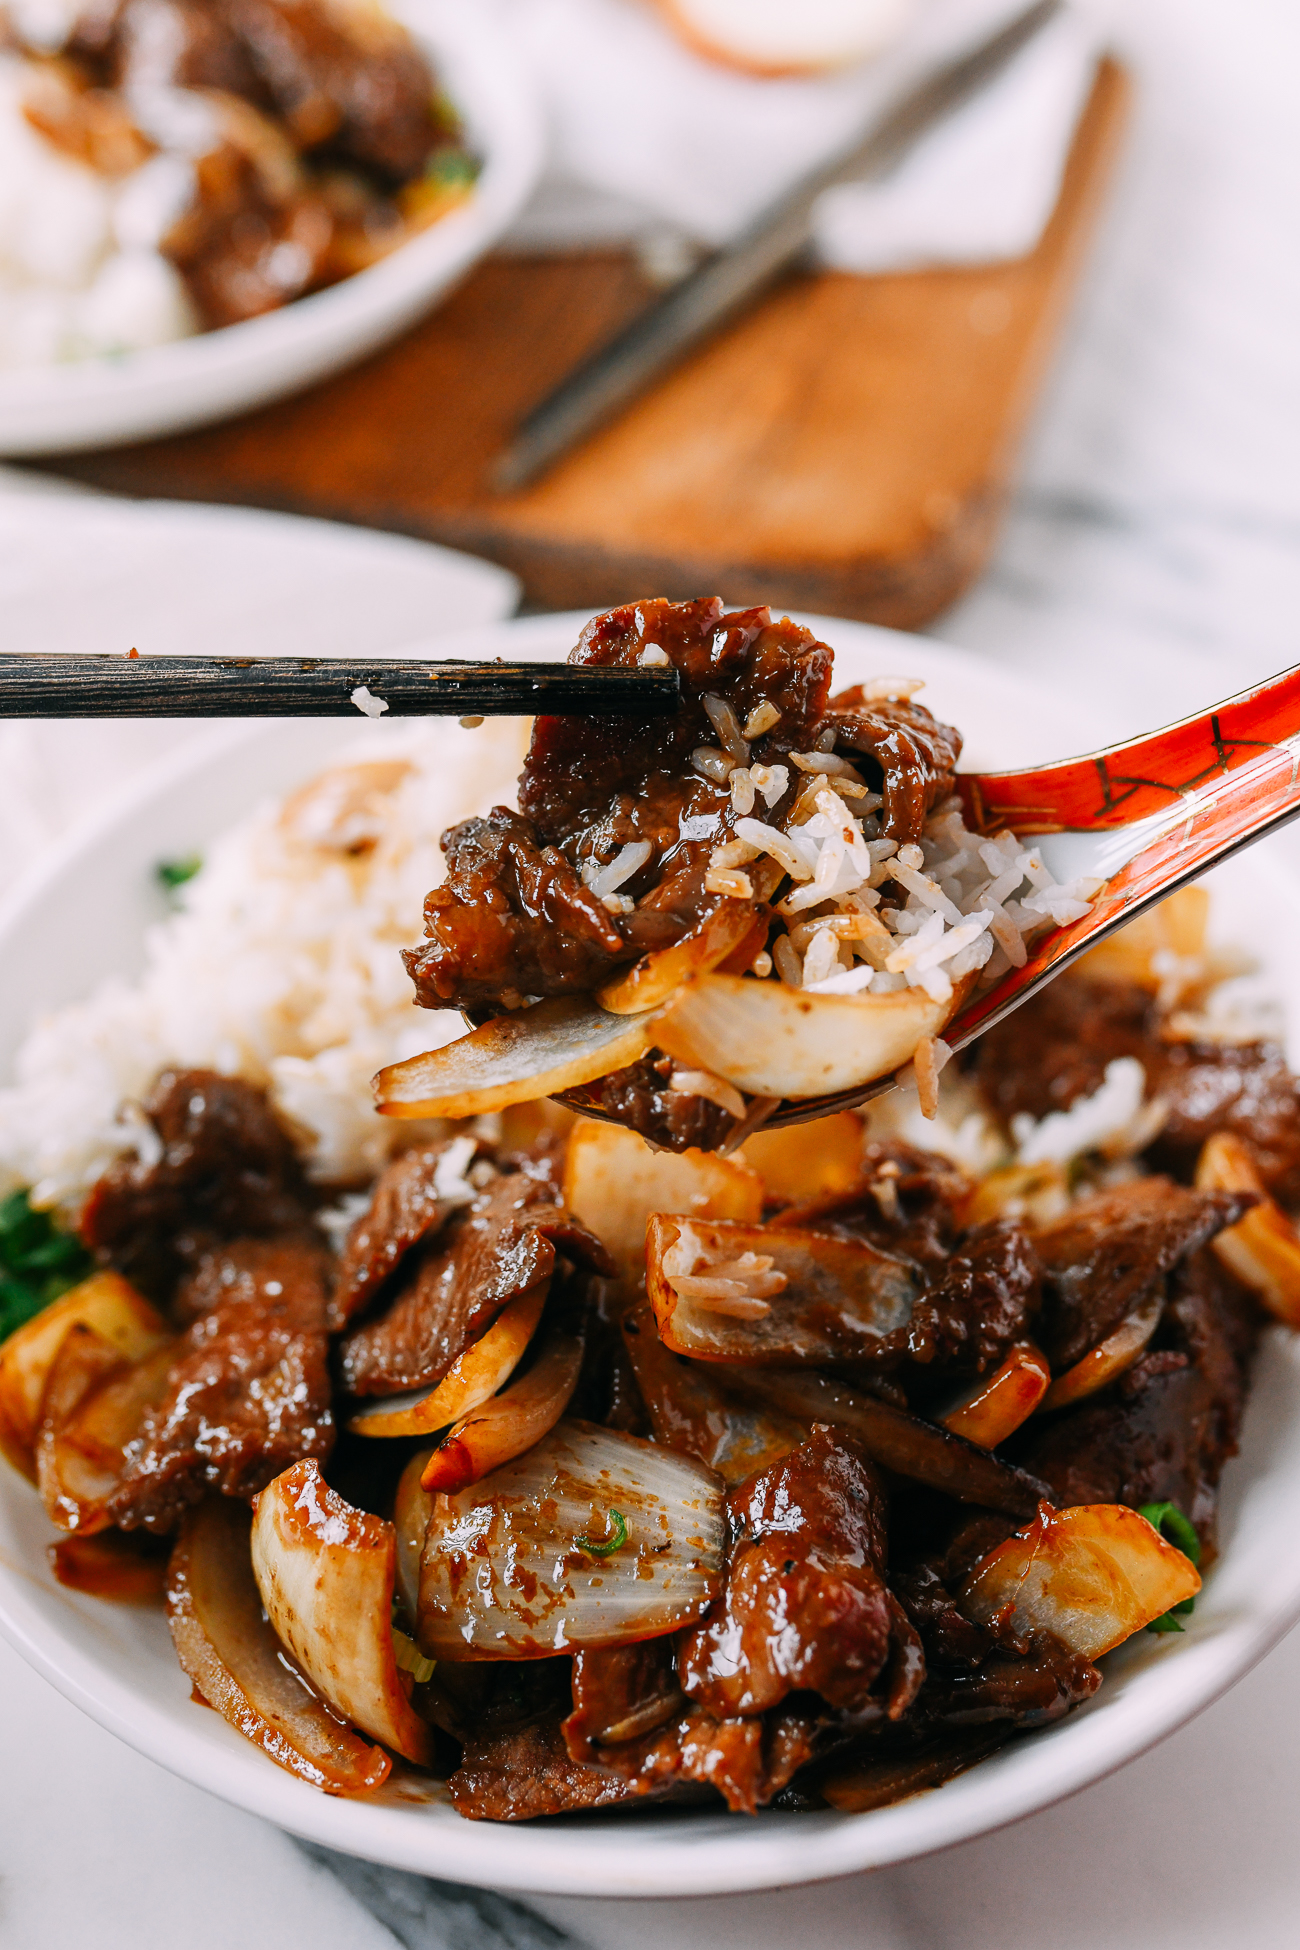 Beef and Onion Stir-fry